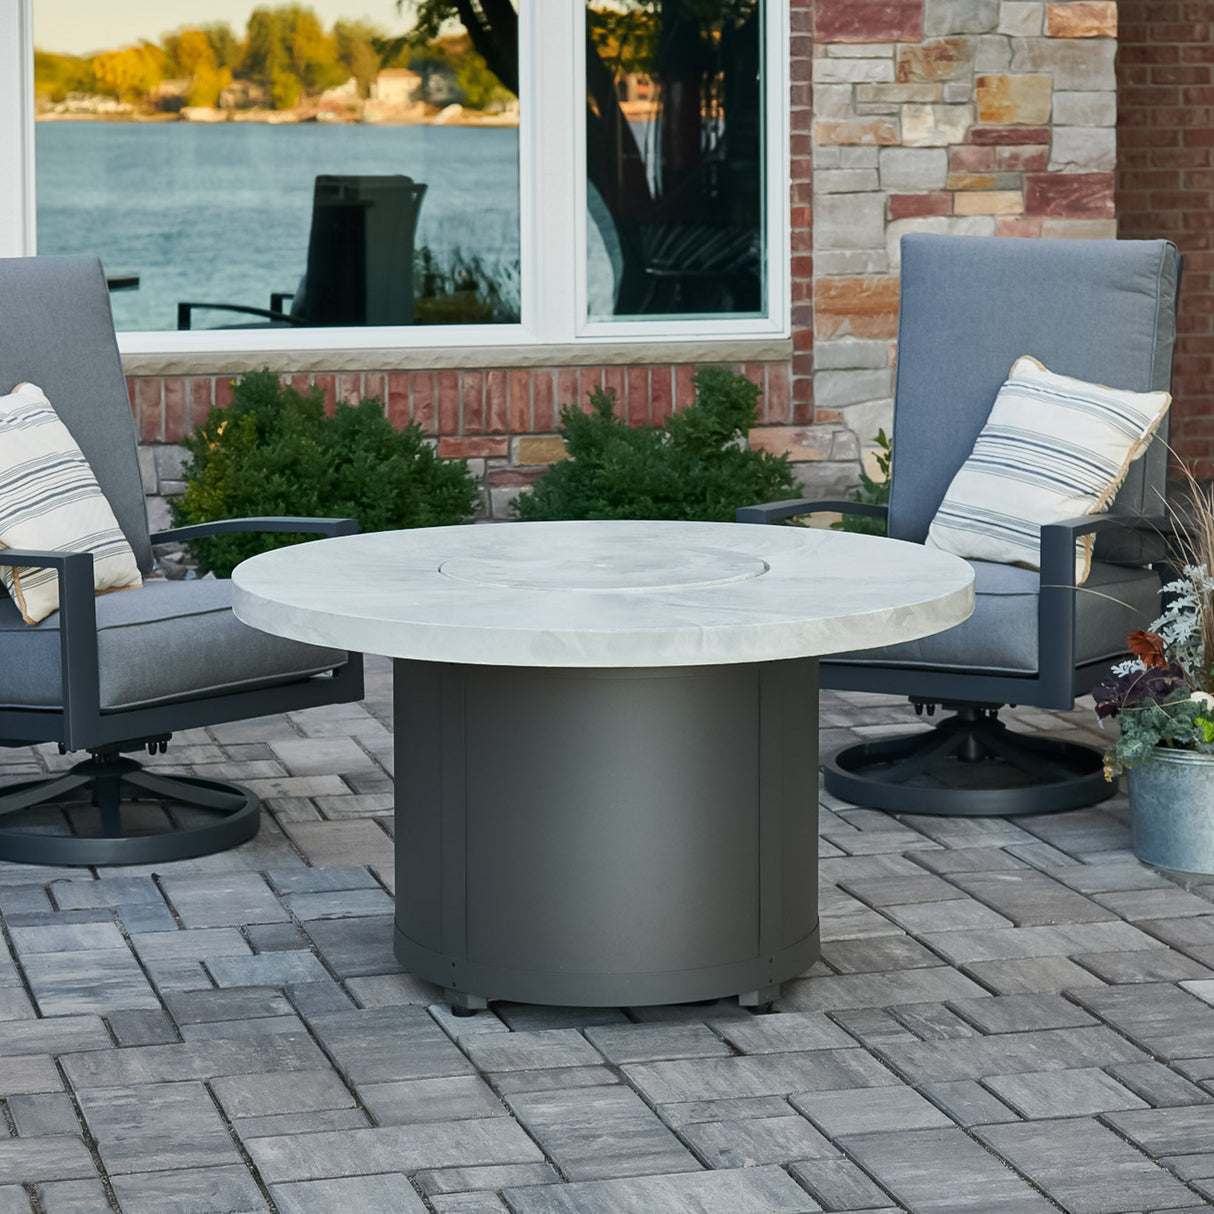 The White Onyx Beacon Round Gas Fire Pit Table with its cover on outside